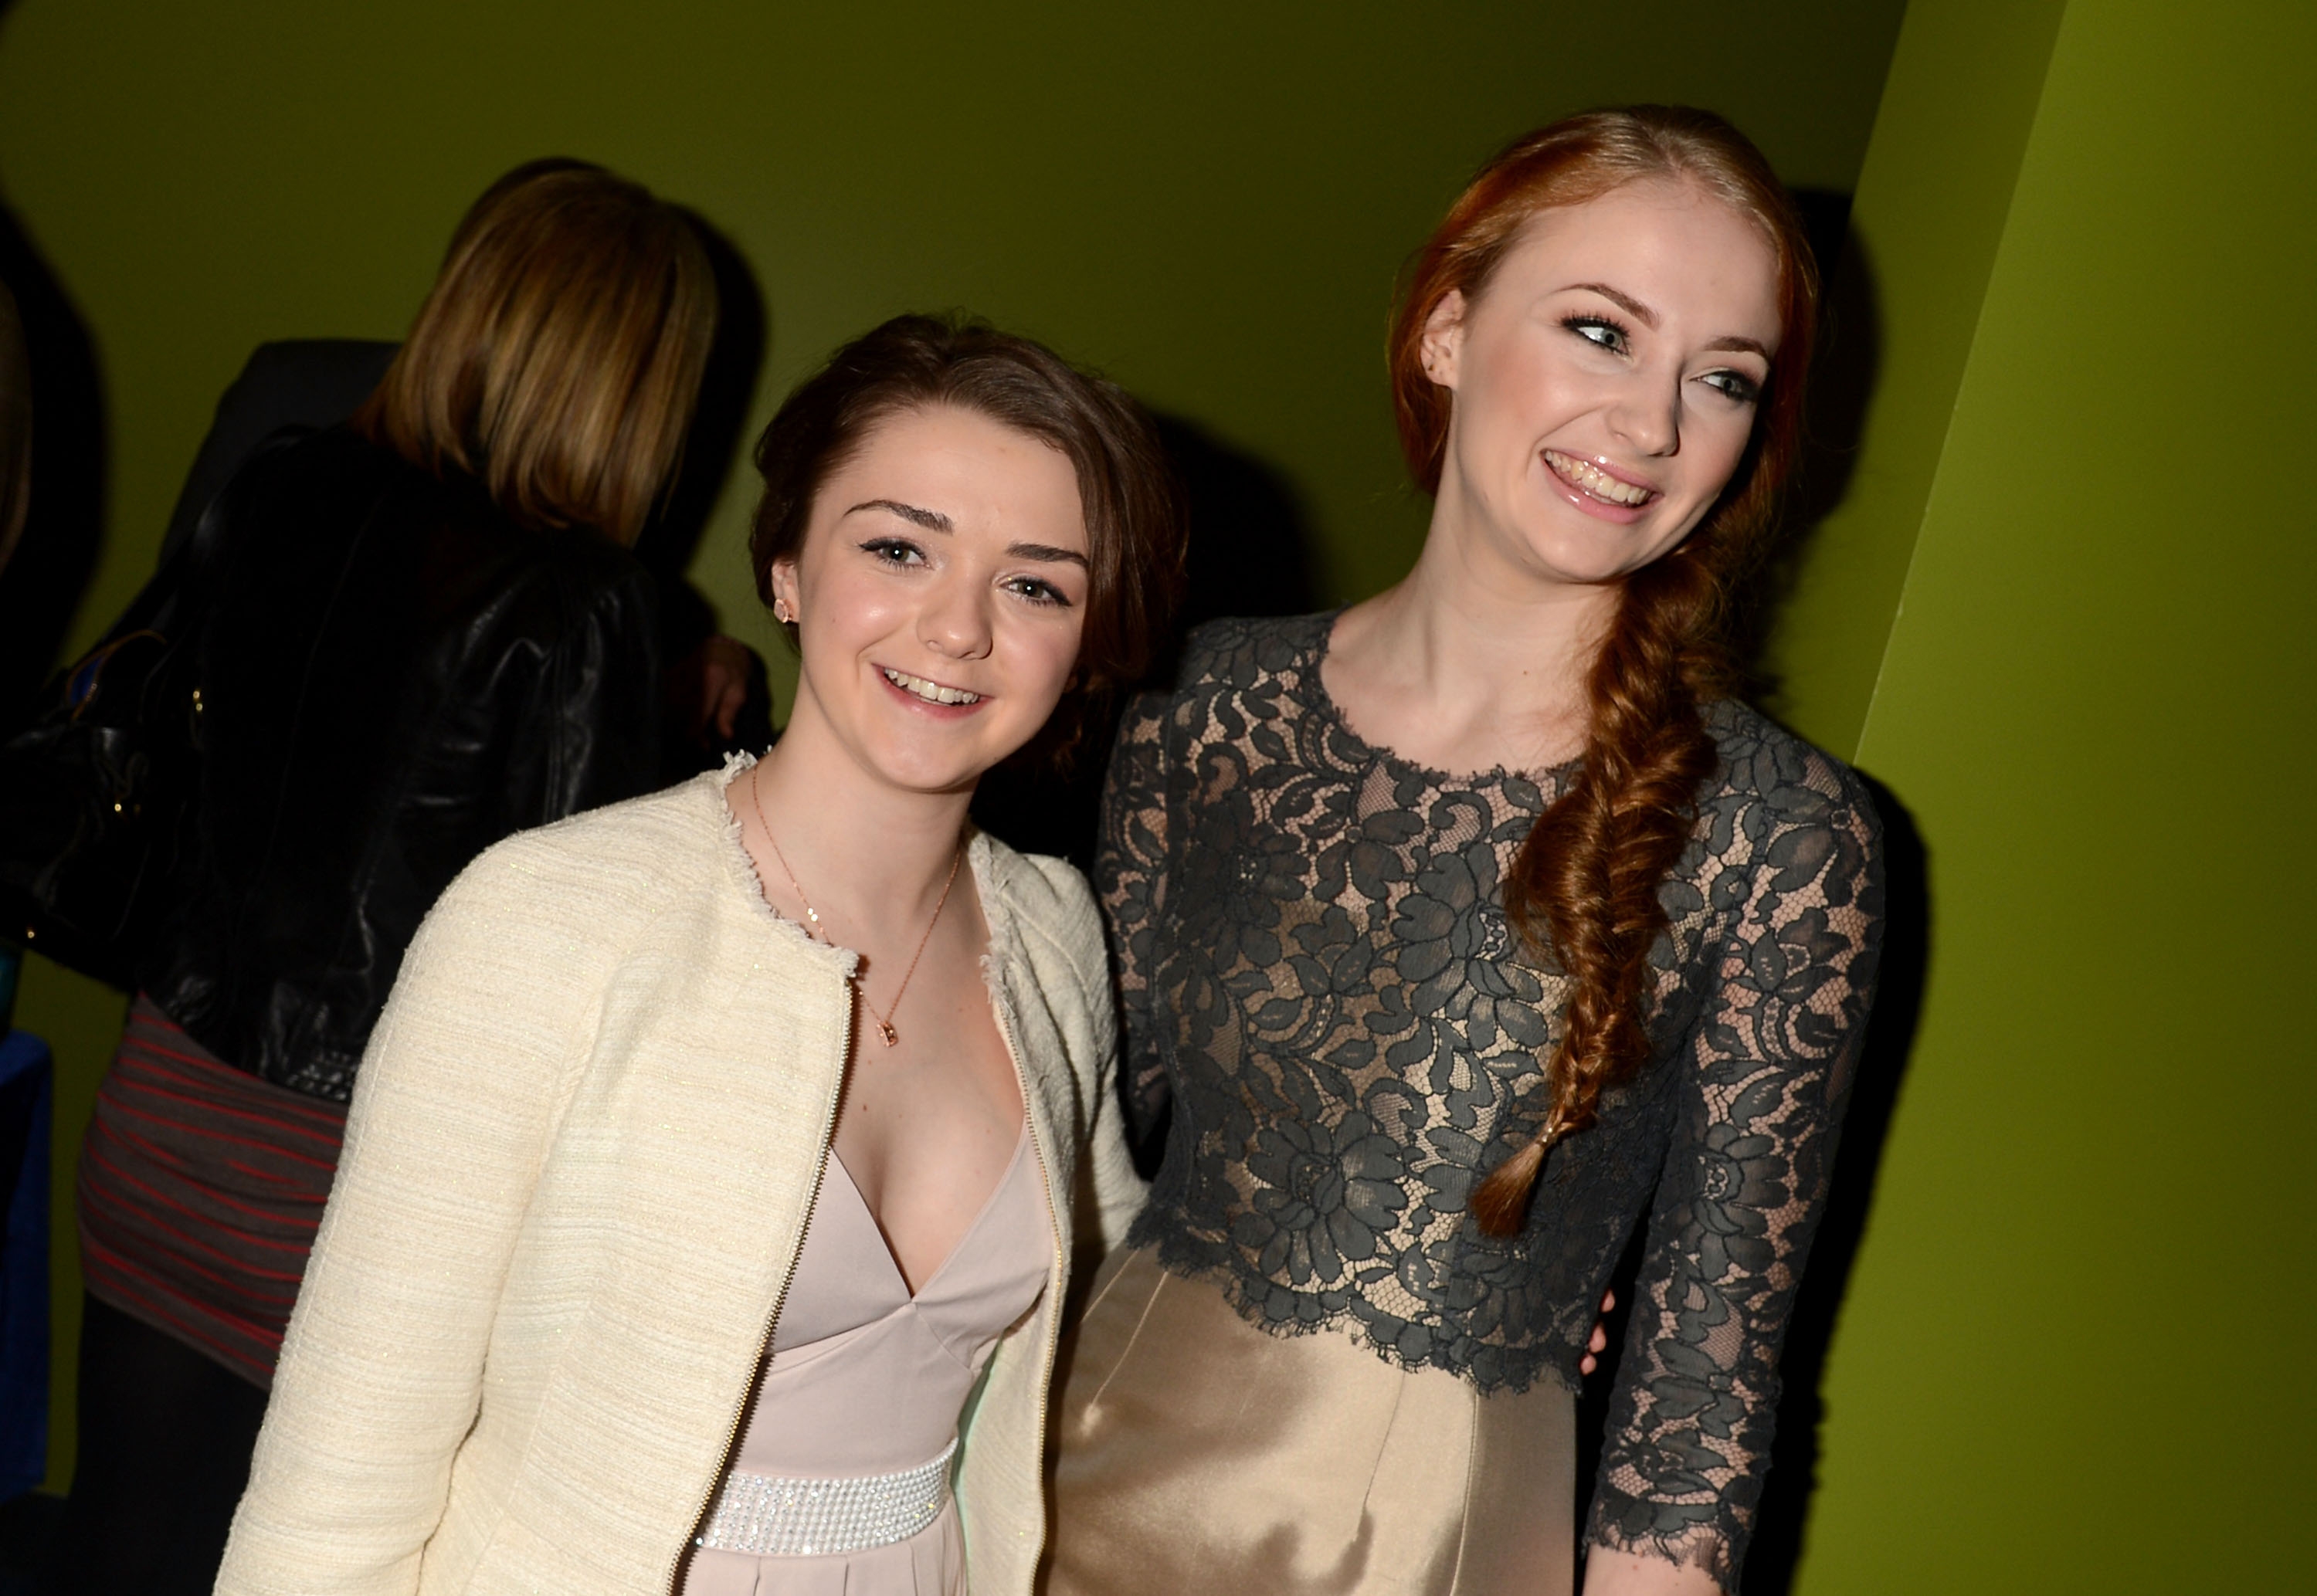 https://maisiewilliams.org/gallery/albums/Public Apperances/2013/March 21st-Game of Thrones Season 3 Seattle Premiere/0006.jpg